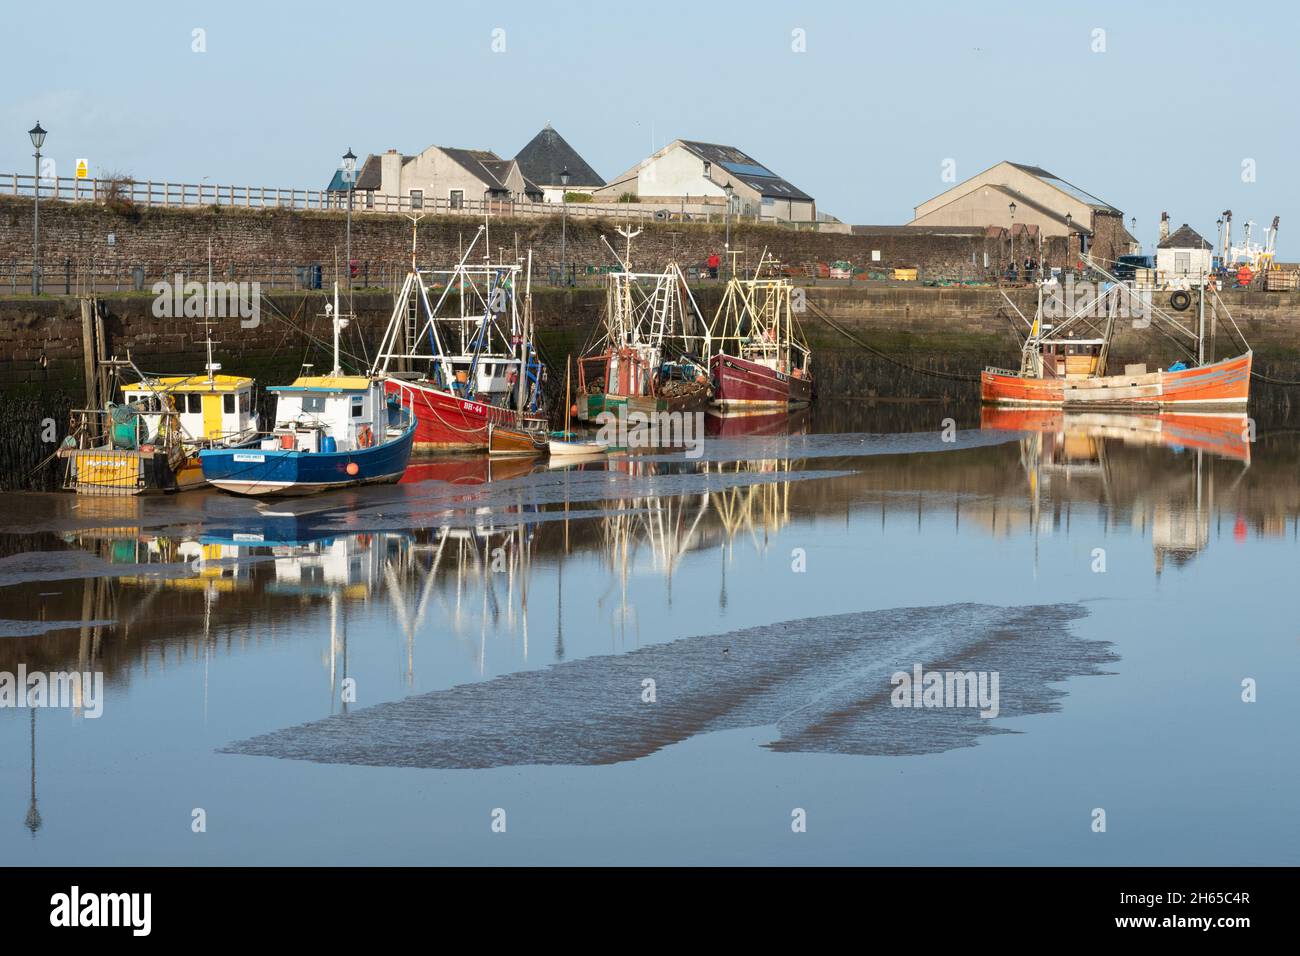 Colourful fishing boats in the harbour at Maryport, a pretty coastal town in Cumbria, England, UK Stock Photo